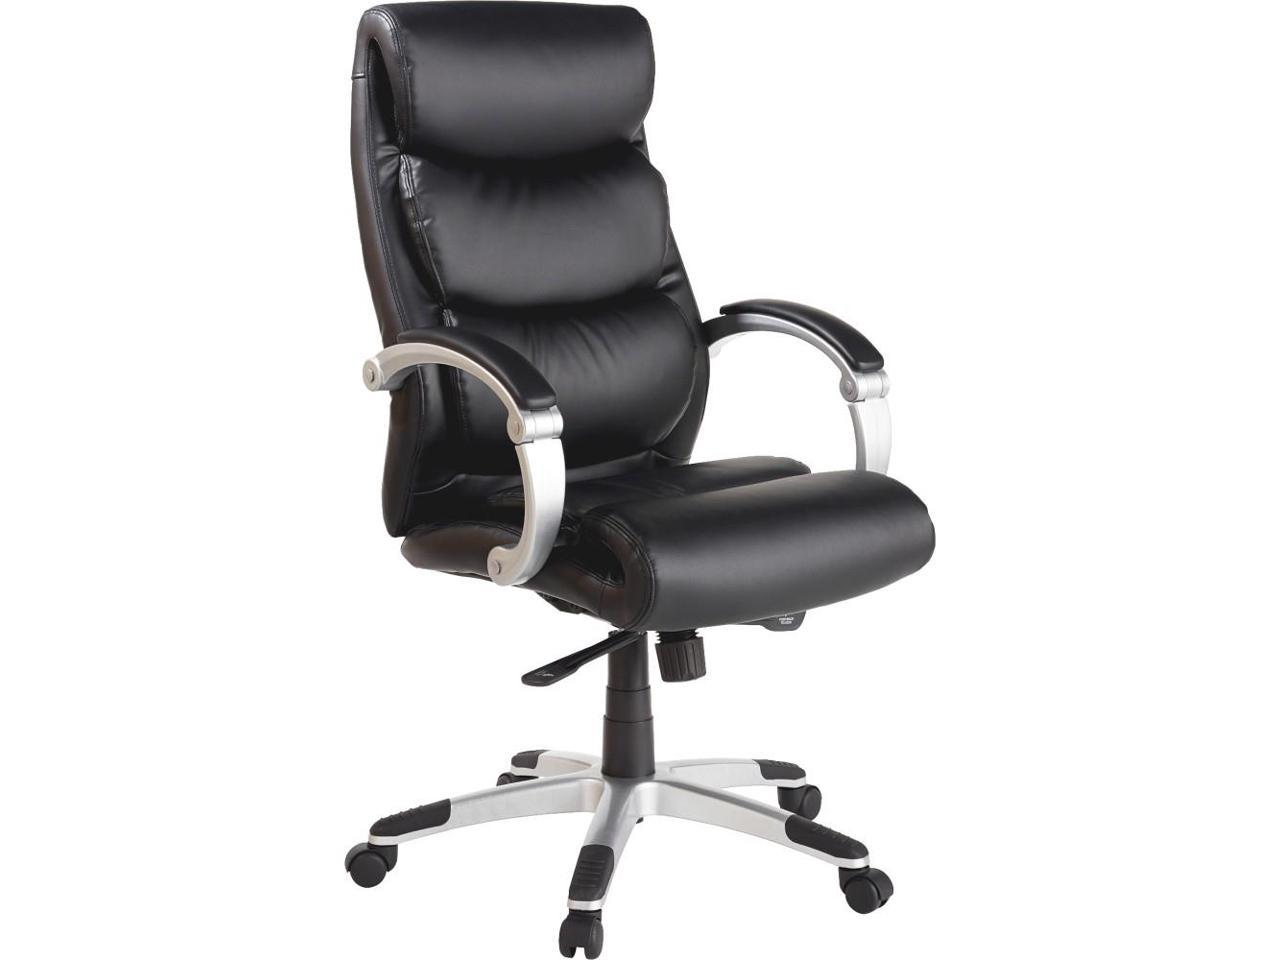 Lorell Exec High-Back Chair Leather Flex Arms 27"x30"x46-1/2" BK 60620 - image 3 of 19